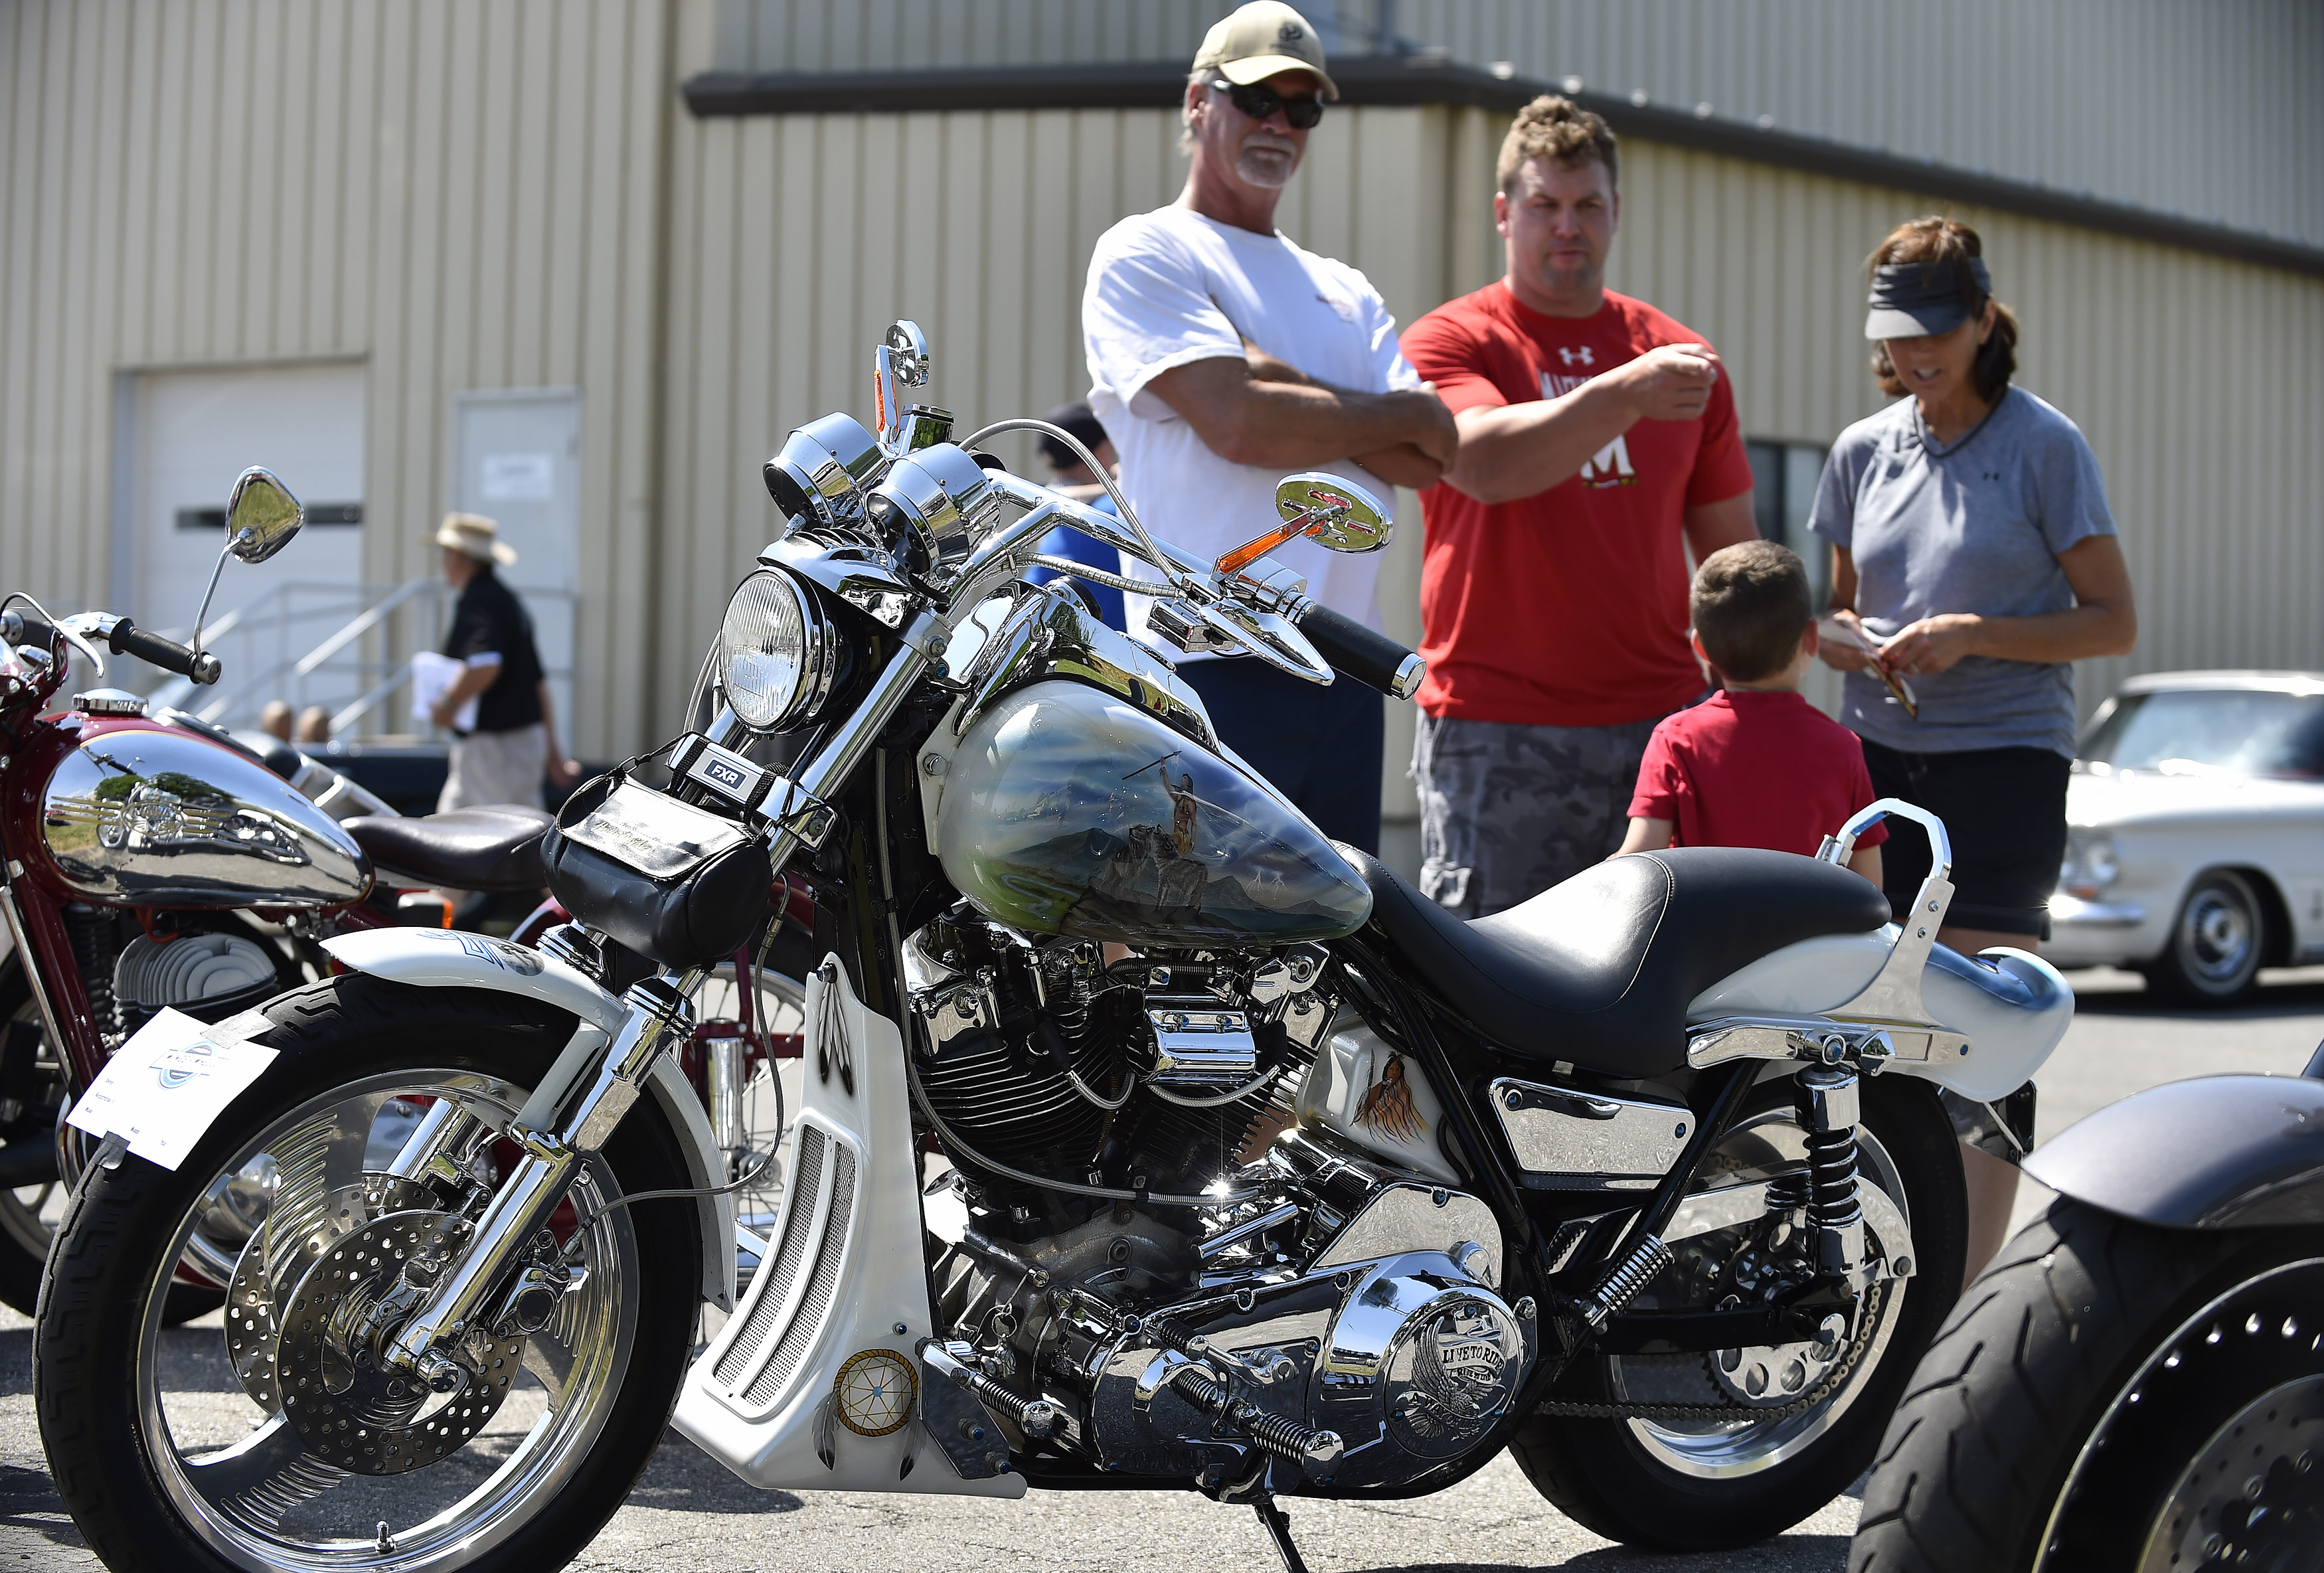 A Harley-Davidson named 'Tator' was the best-in-show motorcycle winner during the Wings 'n Wheels showcase. Photo by David Tulis.